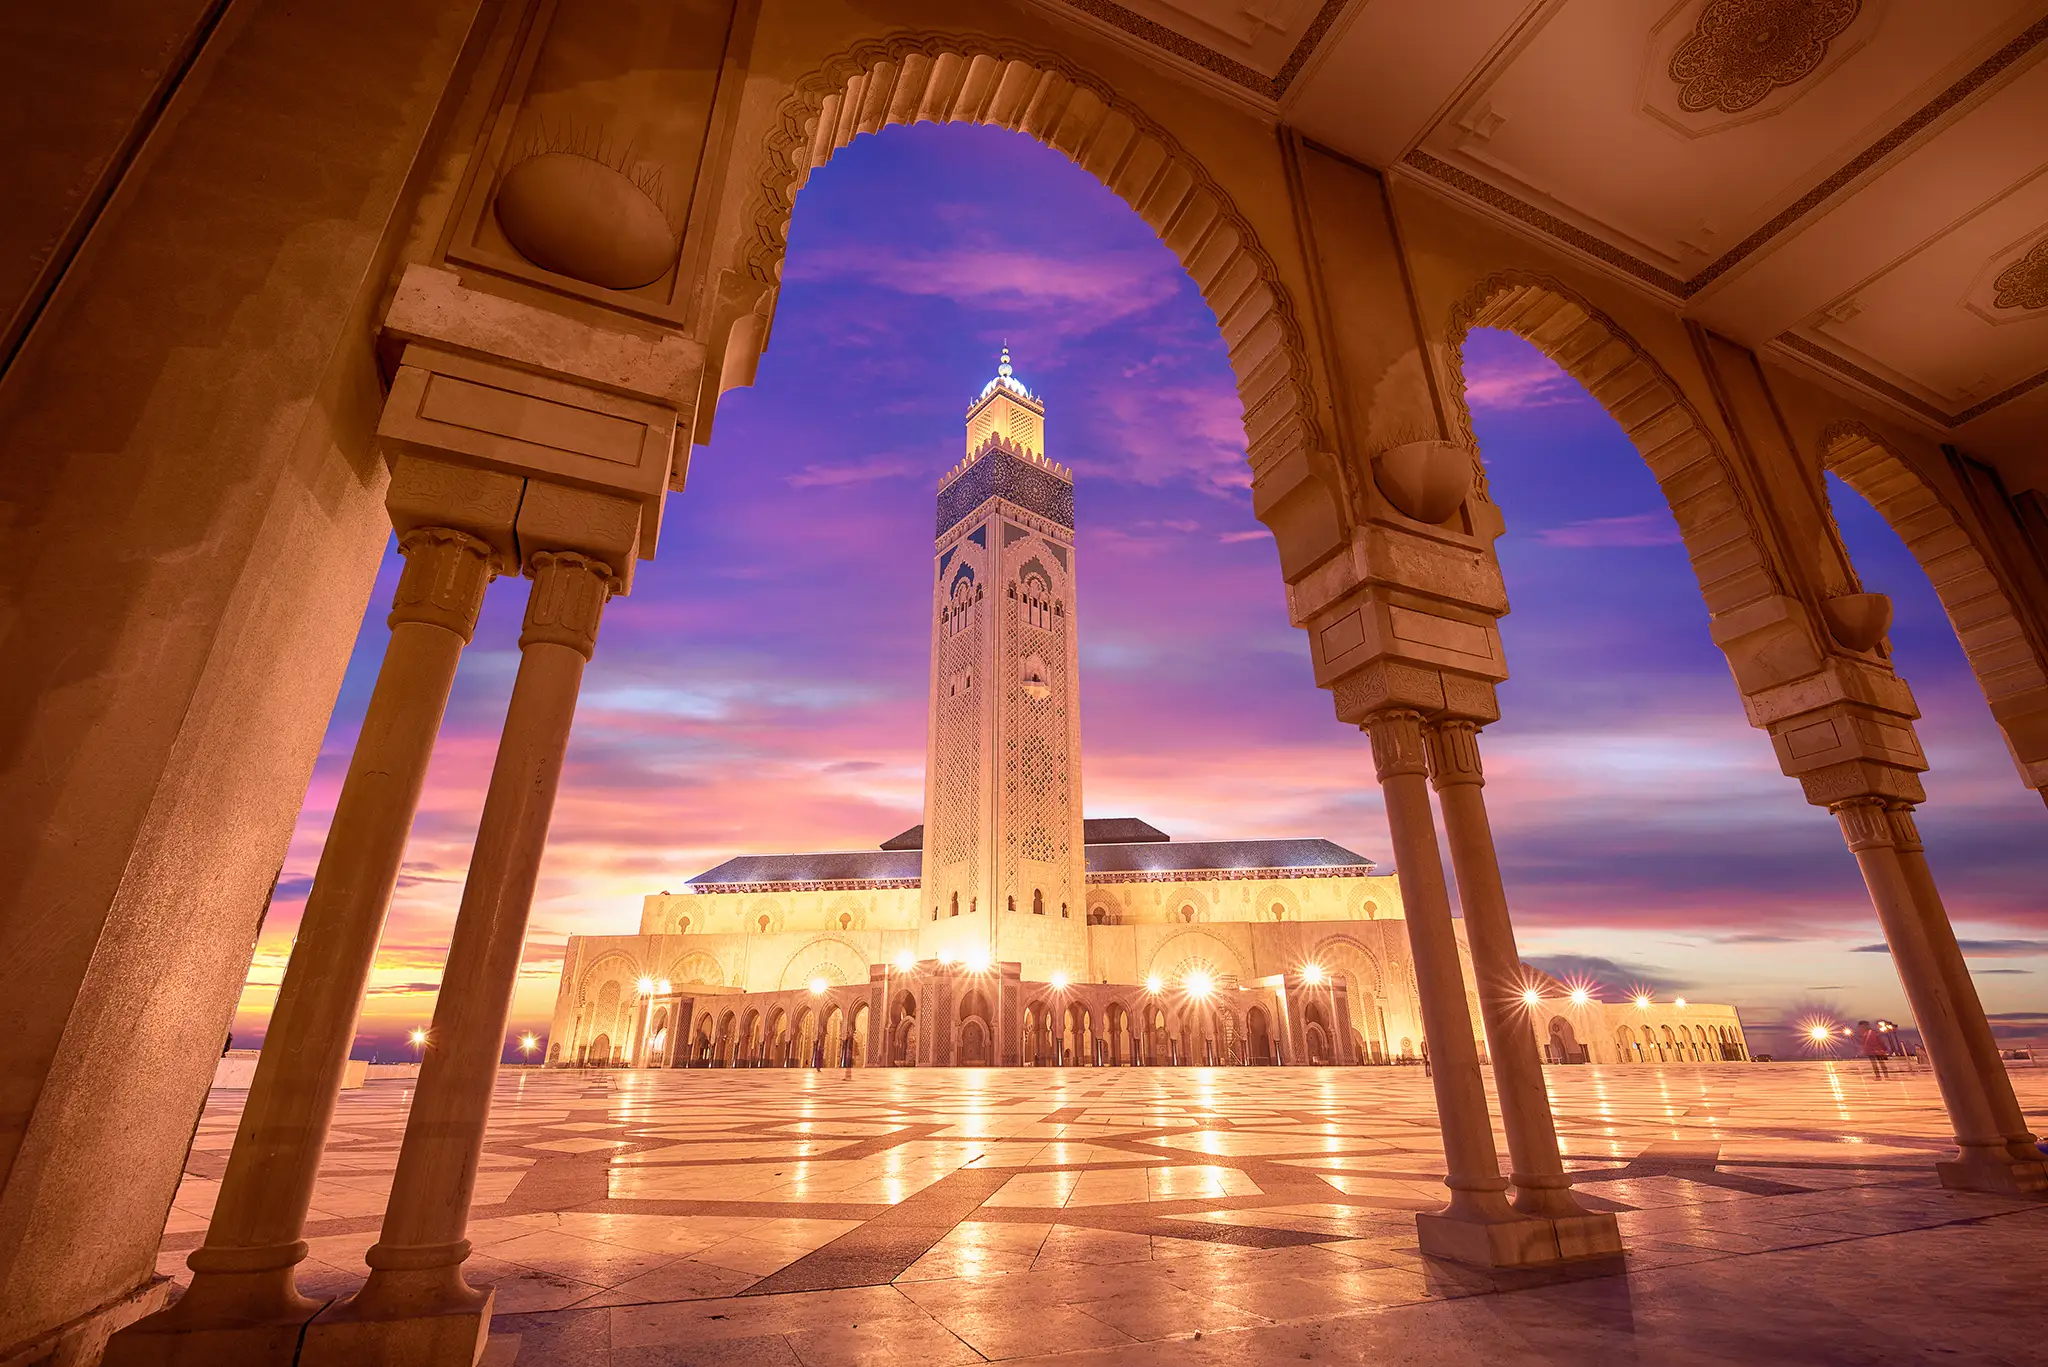 The Hassan II Mosque at sunset in Casablanca, Morocco.